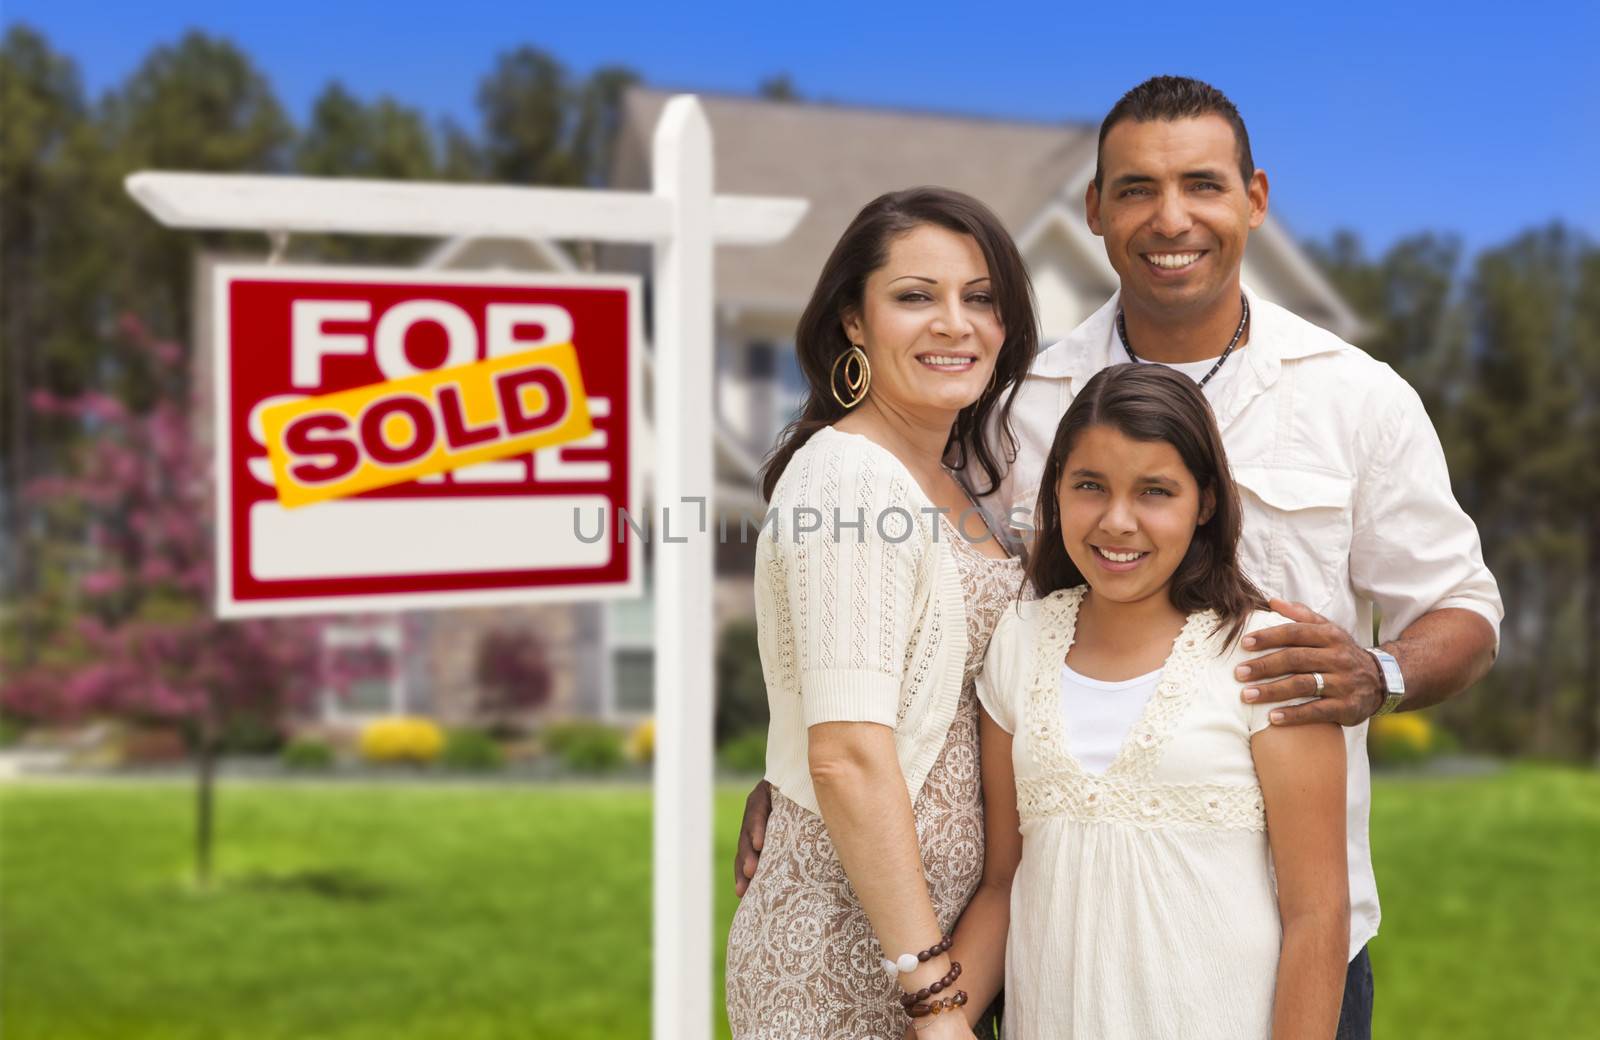 Hispanic Mother, Father and Daughter in Front of Their New Home with Sold Home For Sale Real Estate Sign.